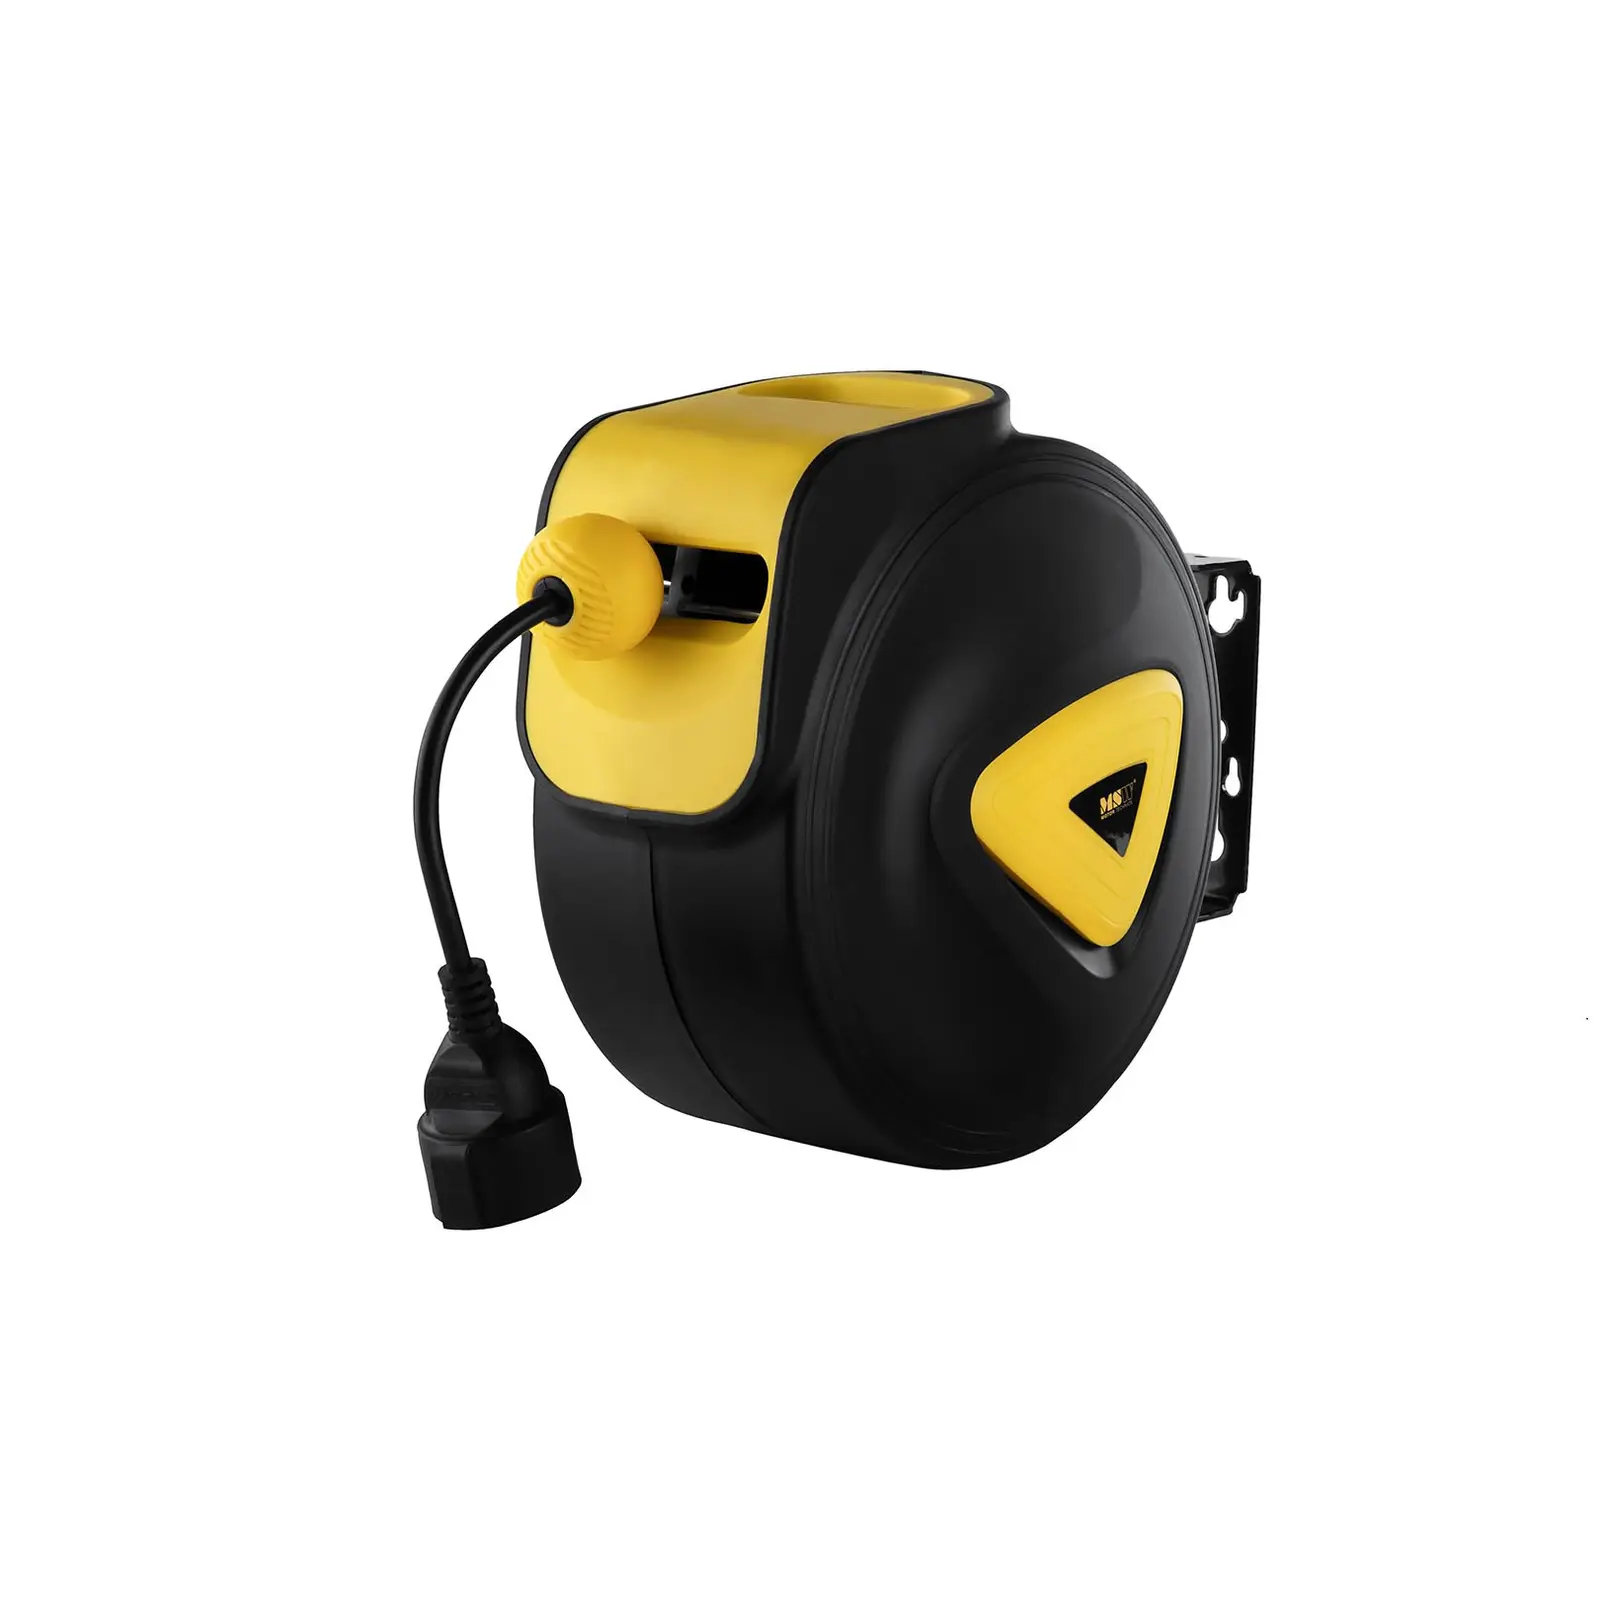 Retractable Cable Reel - Automatic - 20 m + 1.5 m